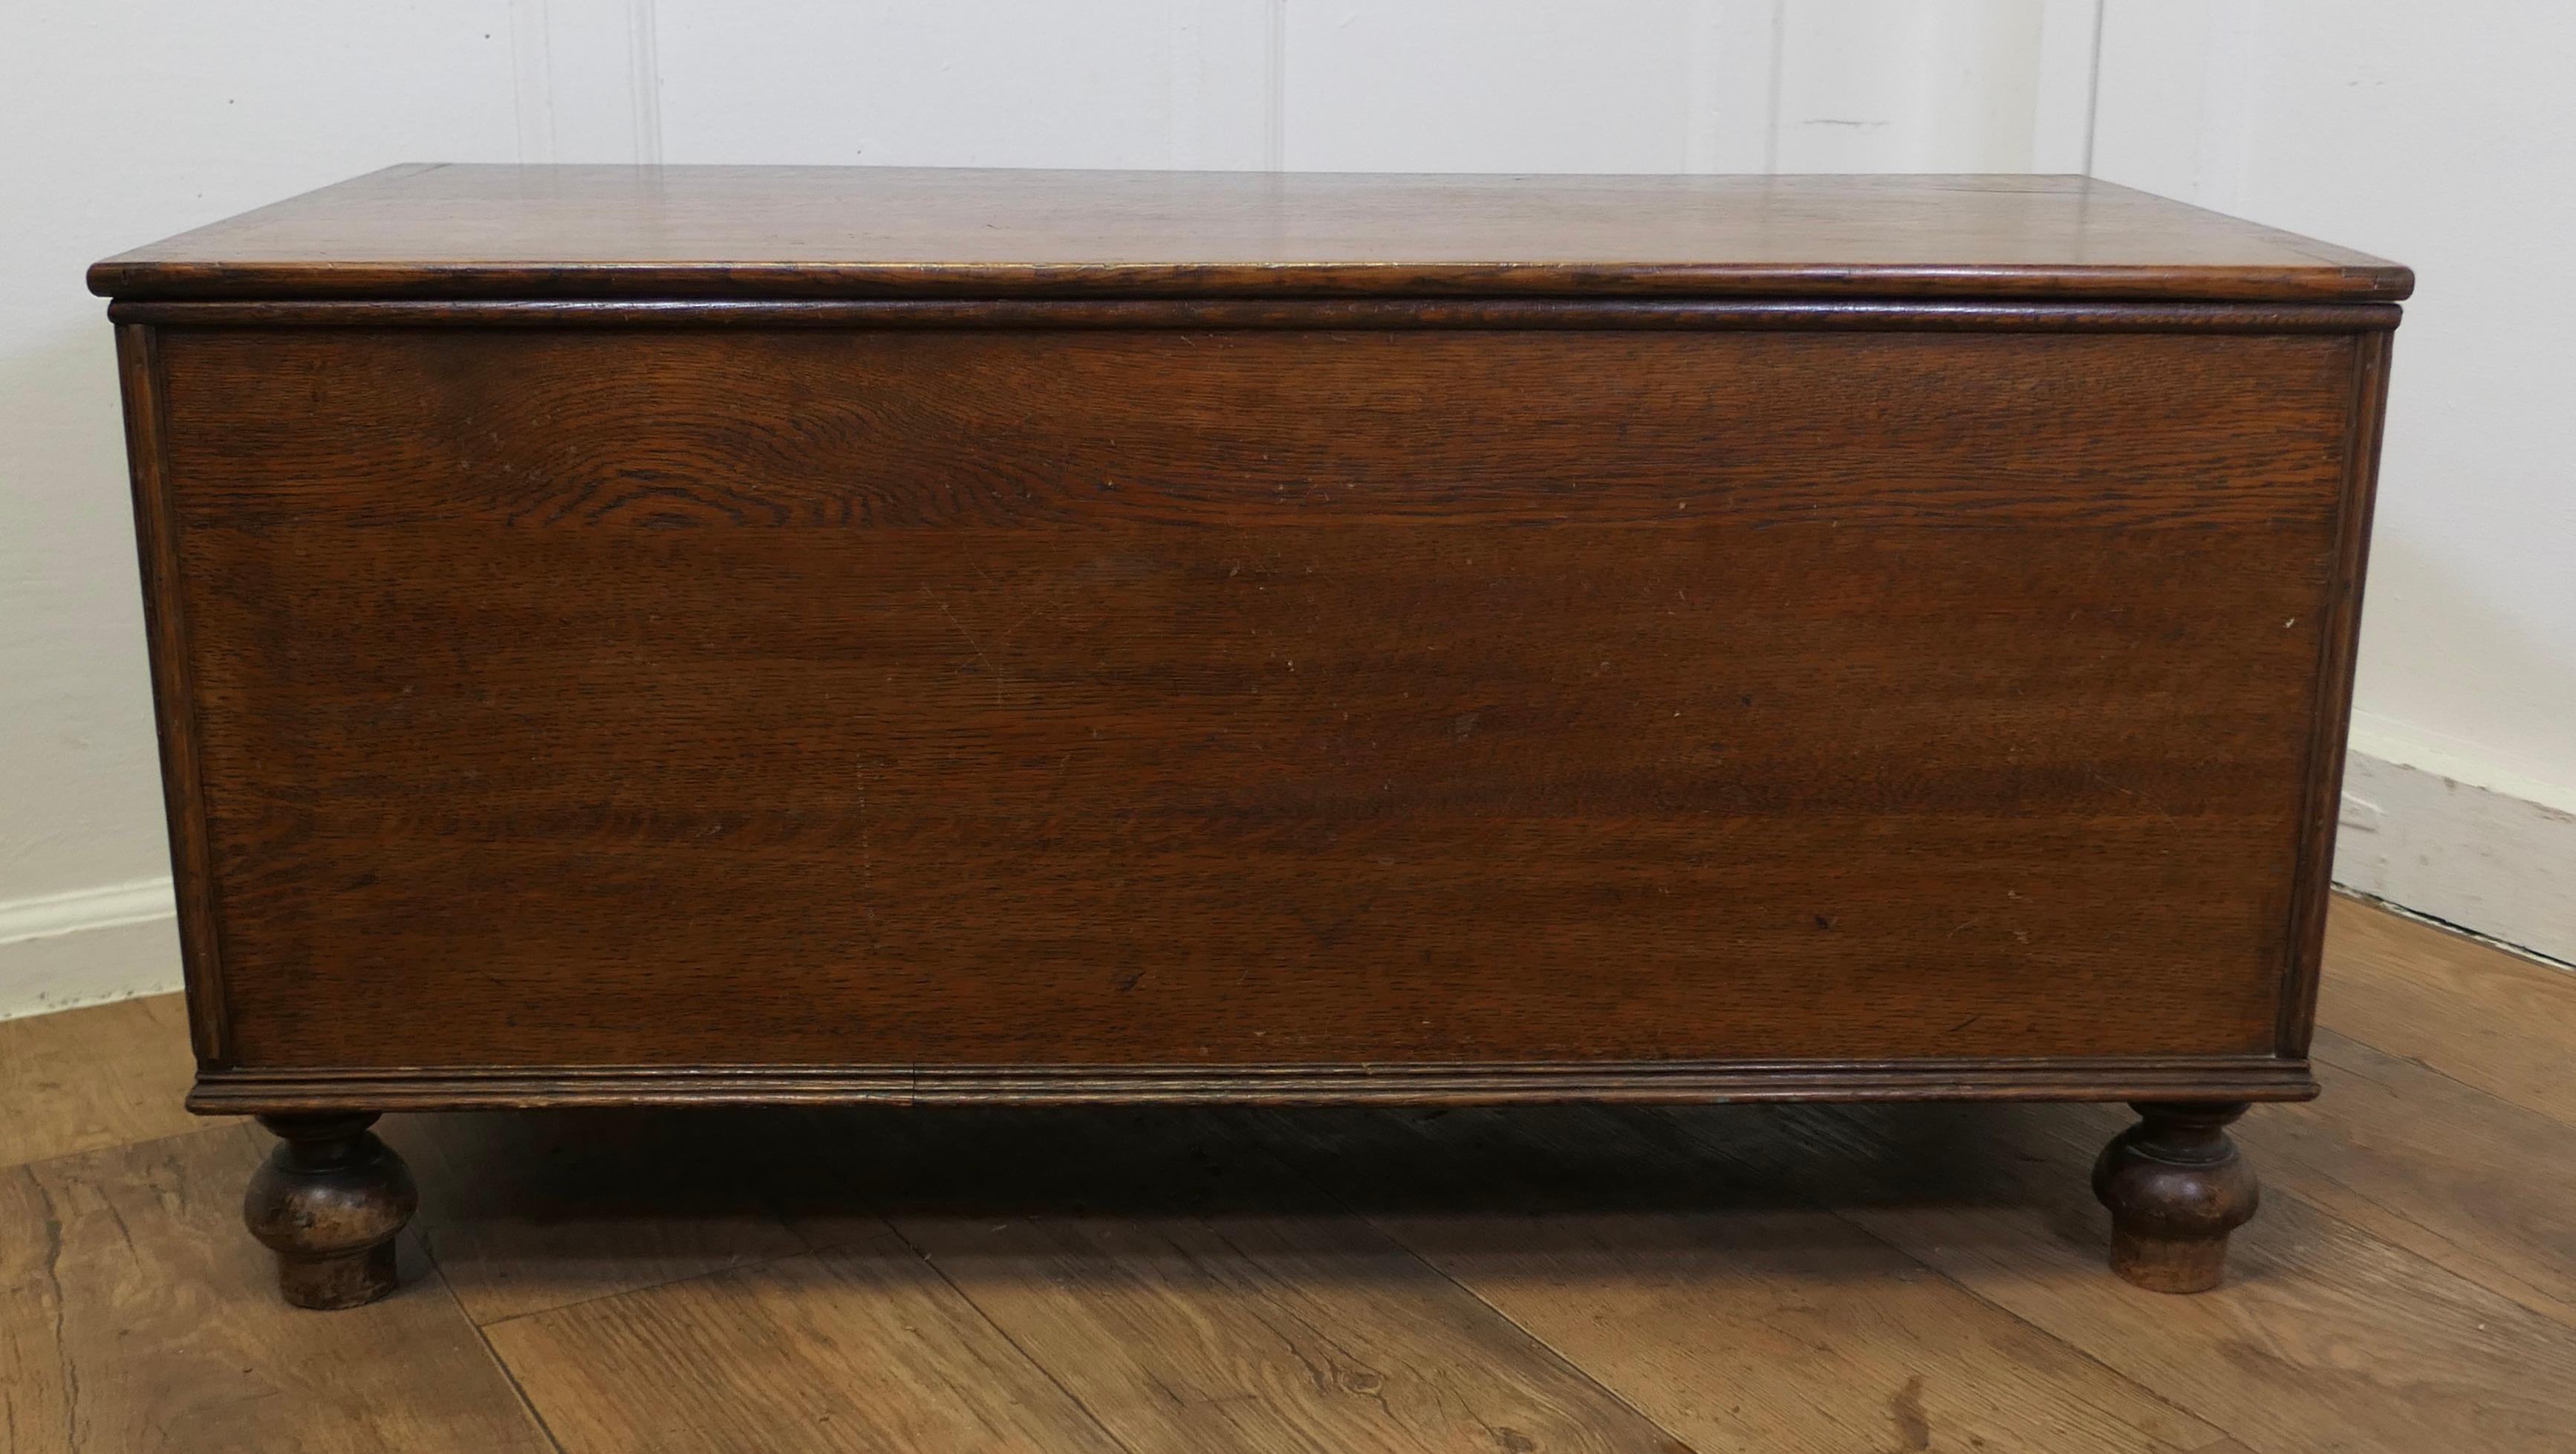 Large Victorian Oak Blanket Box, on feet

Large Victorian Oak Blanket Box, Toy Chest or Coffee Table 

 This is a very good quality heavy oak box, the wood has a delightful natural grain, the box is very attractive with turned feet
It is lucky to